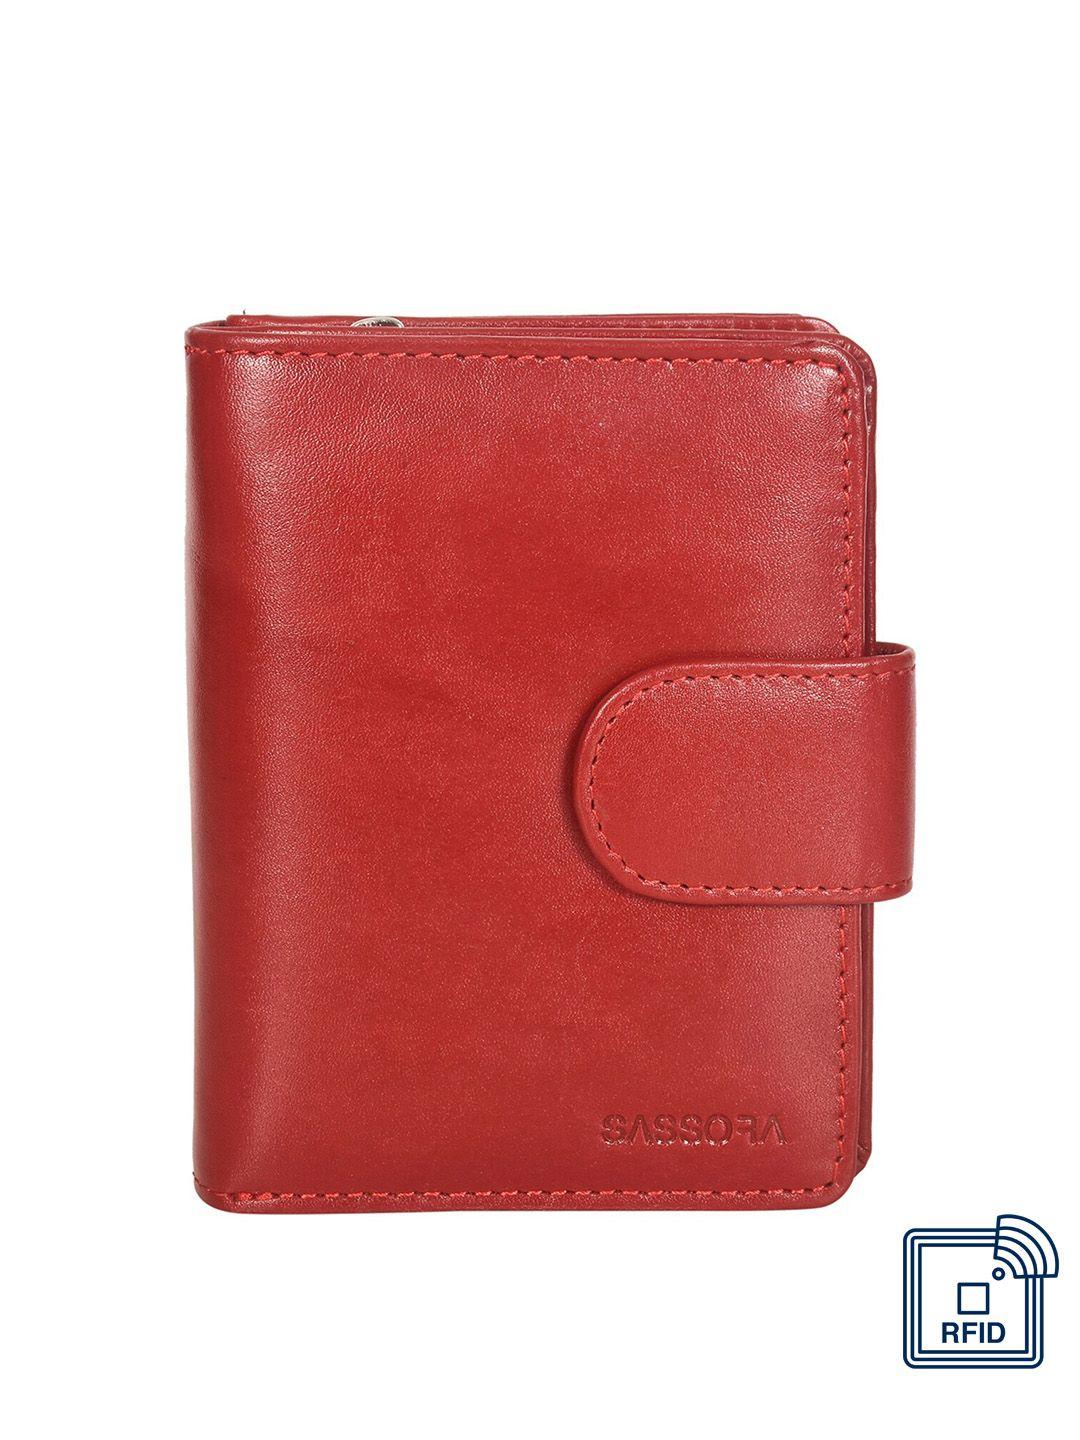 sassora women red solid genuine leather rfid two fold wallet